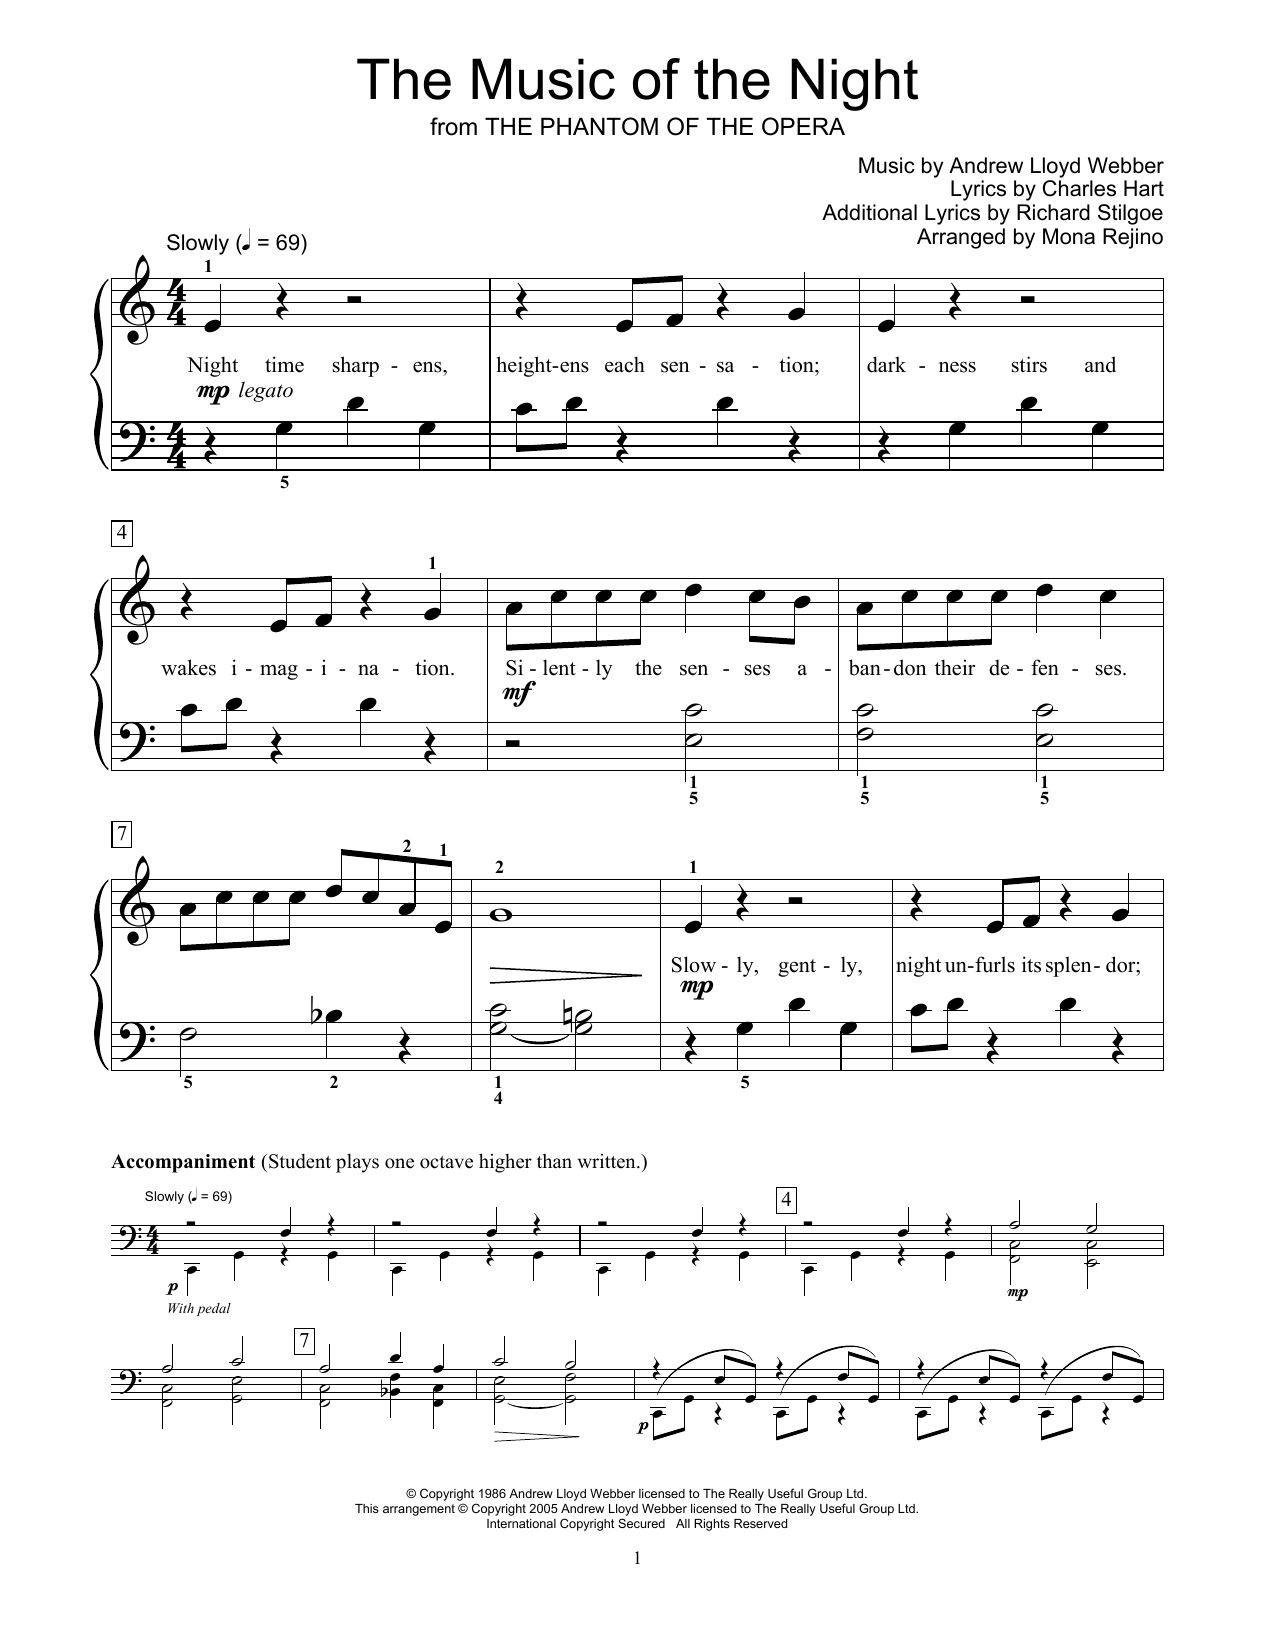 hermosa recoger autobús Andrew Lloyd Webber "The Music Of The Night (from The Phantom Of The Opera)  (arr. Mona Rejino)" Sheet Music PDF Notes, Chords | Broadway Score  Educational Piano Download Printable. SKU: 418863